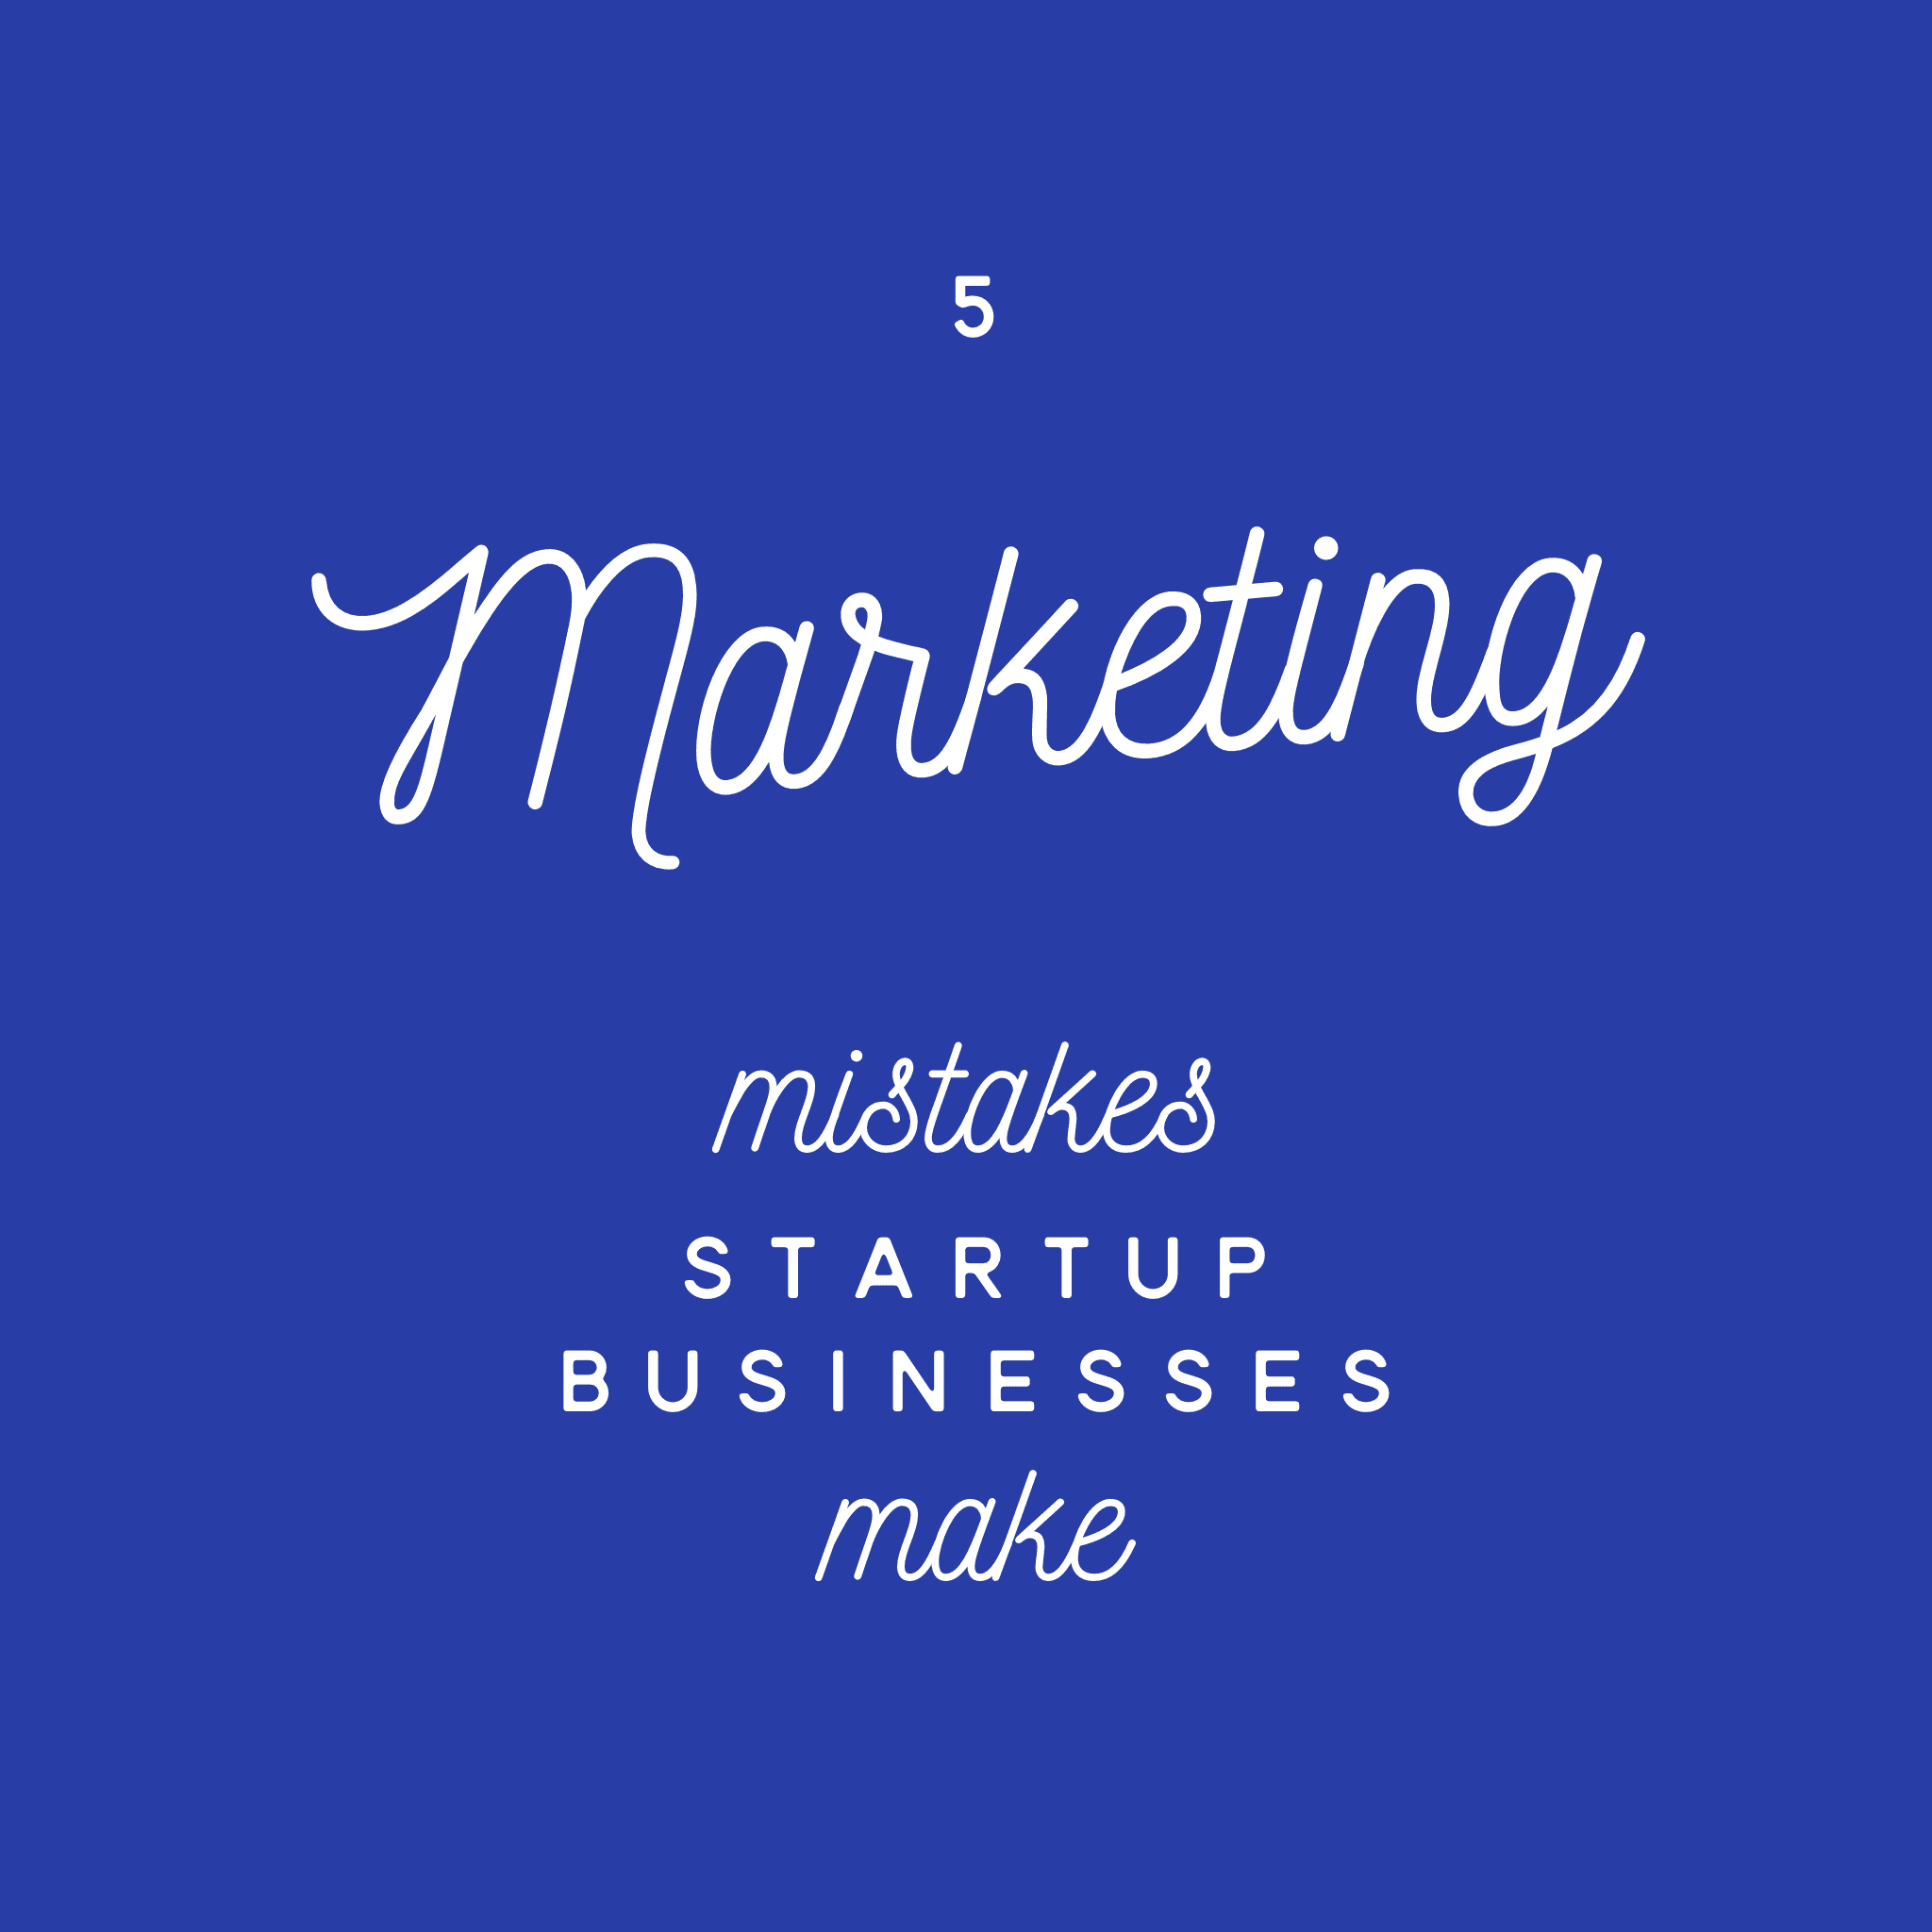 5 Marketing Mistakes Startup Businesses Make